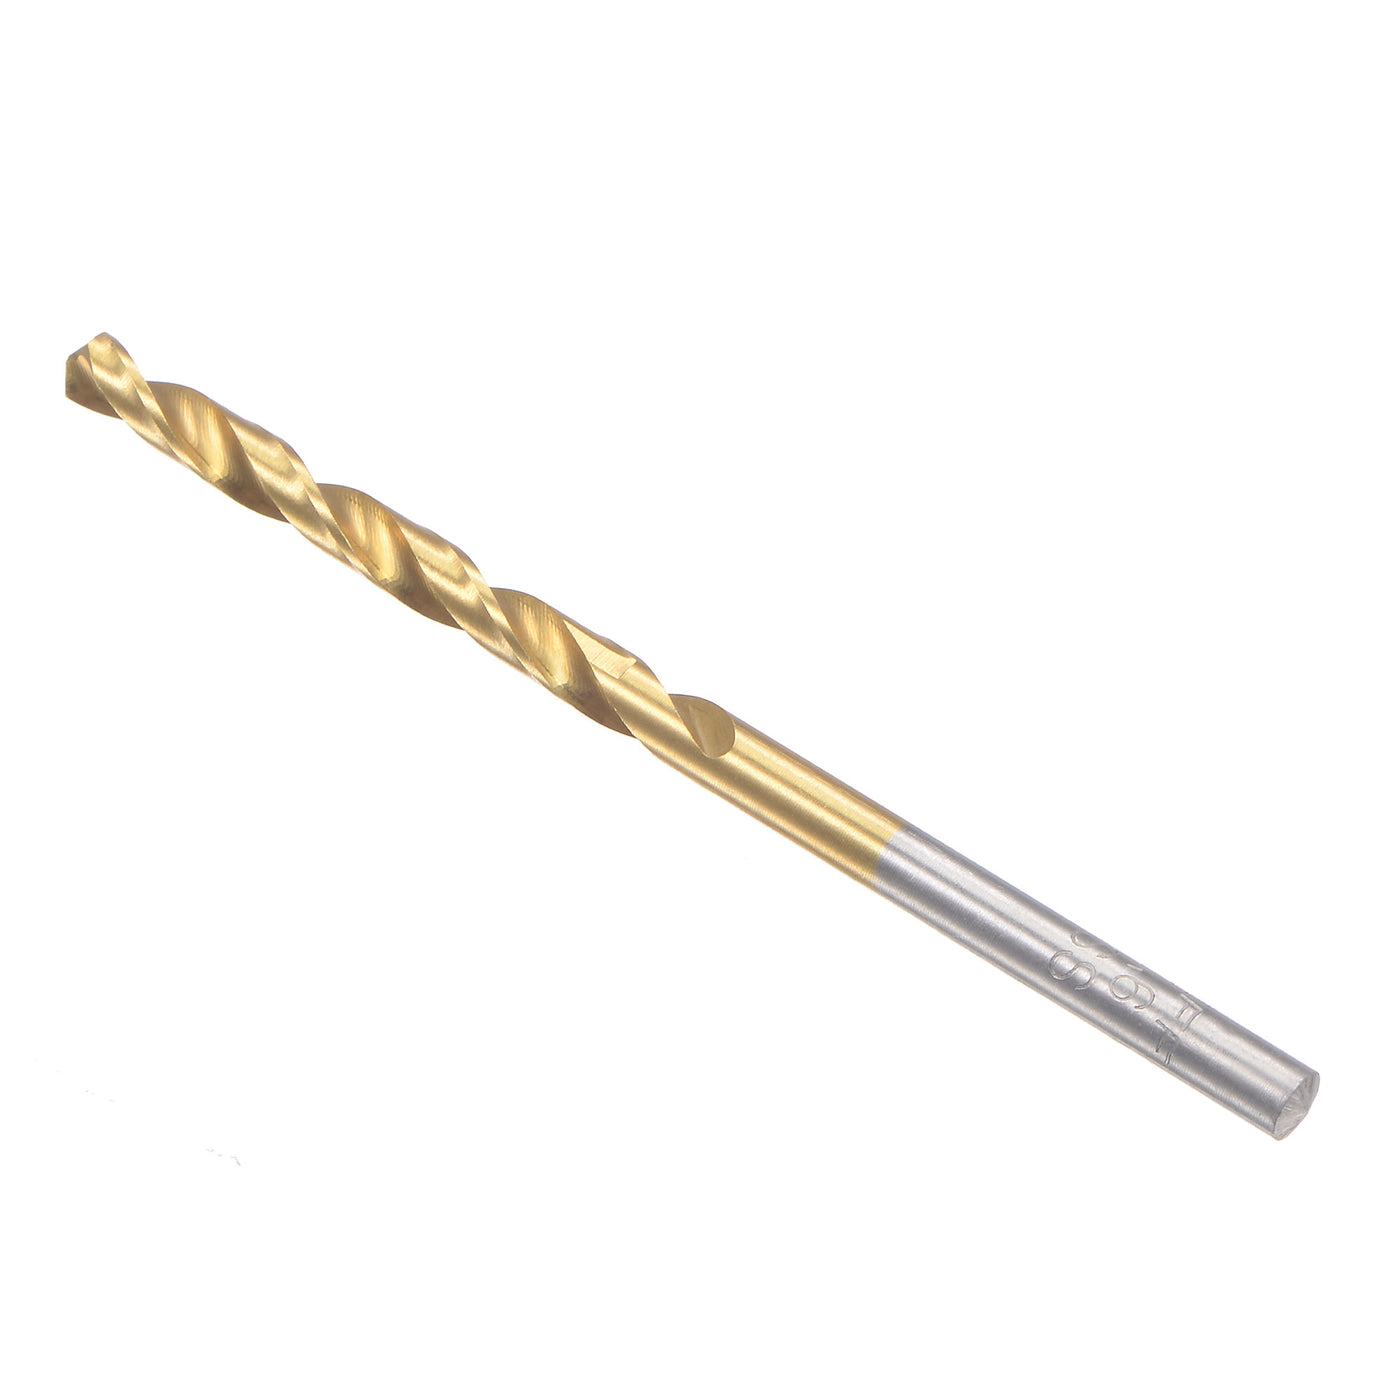 uxcell Uxcell High Speed Steel Twist Drill Bit 3.6mm Fully Ground Titanium Coated 2 Pcs